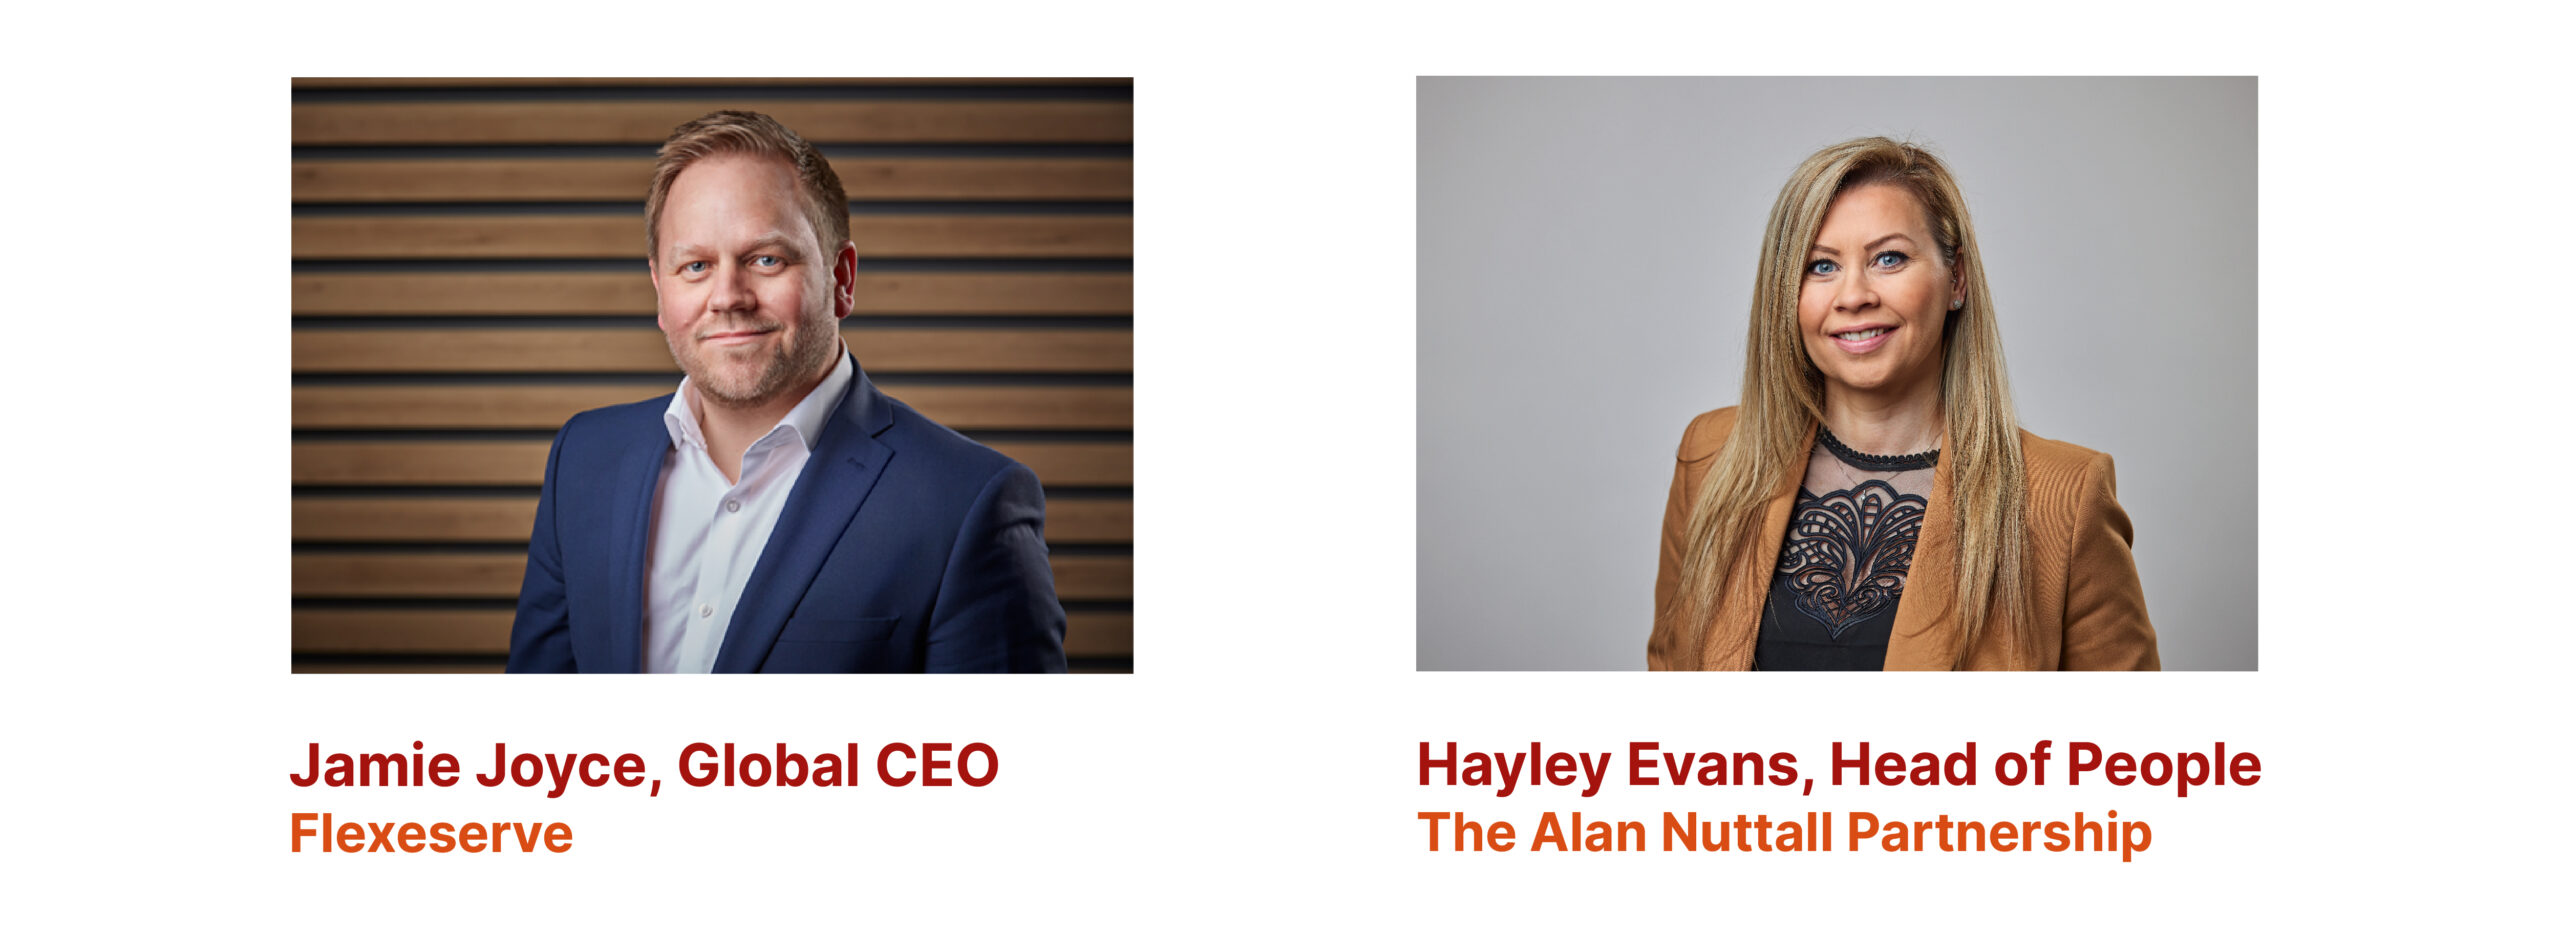 Lockup of headshots for Jamie Joyce, Global CEO of Flexeserve; and Hayley Evans, Head of People for The Alan Nuttall Partnership